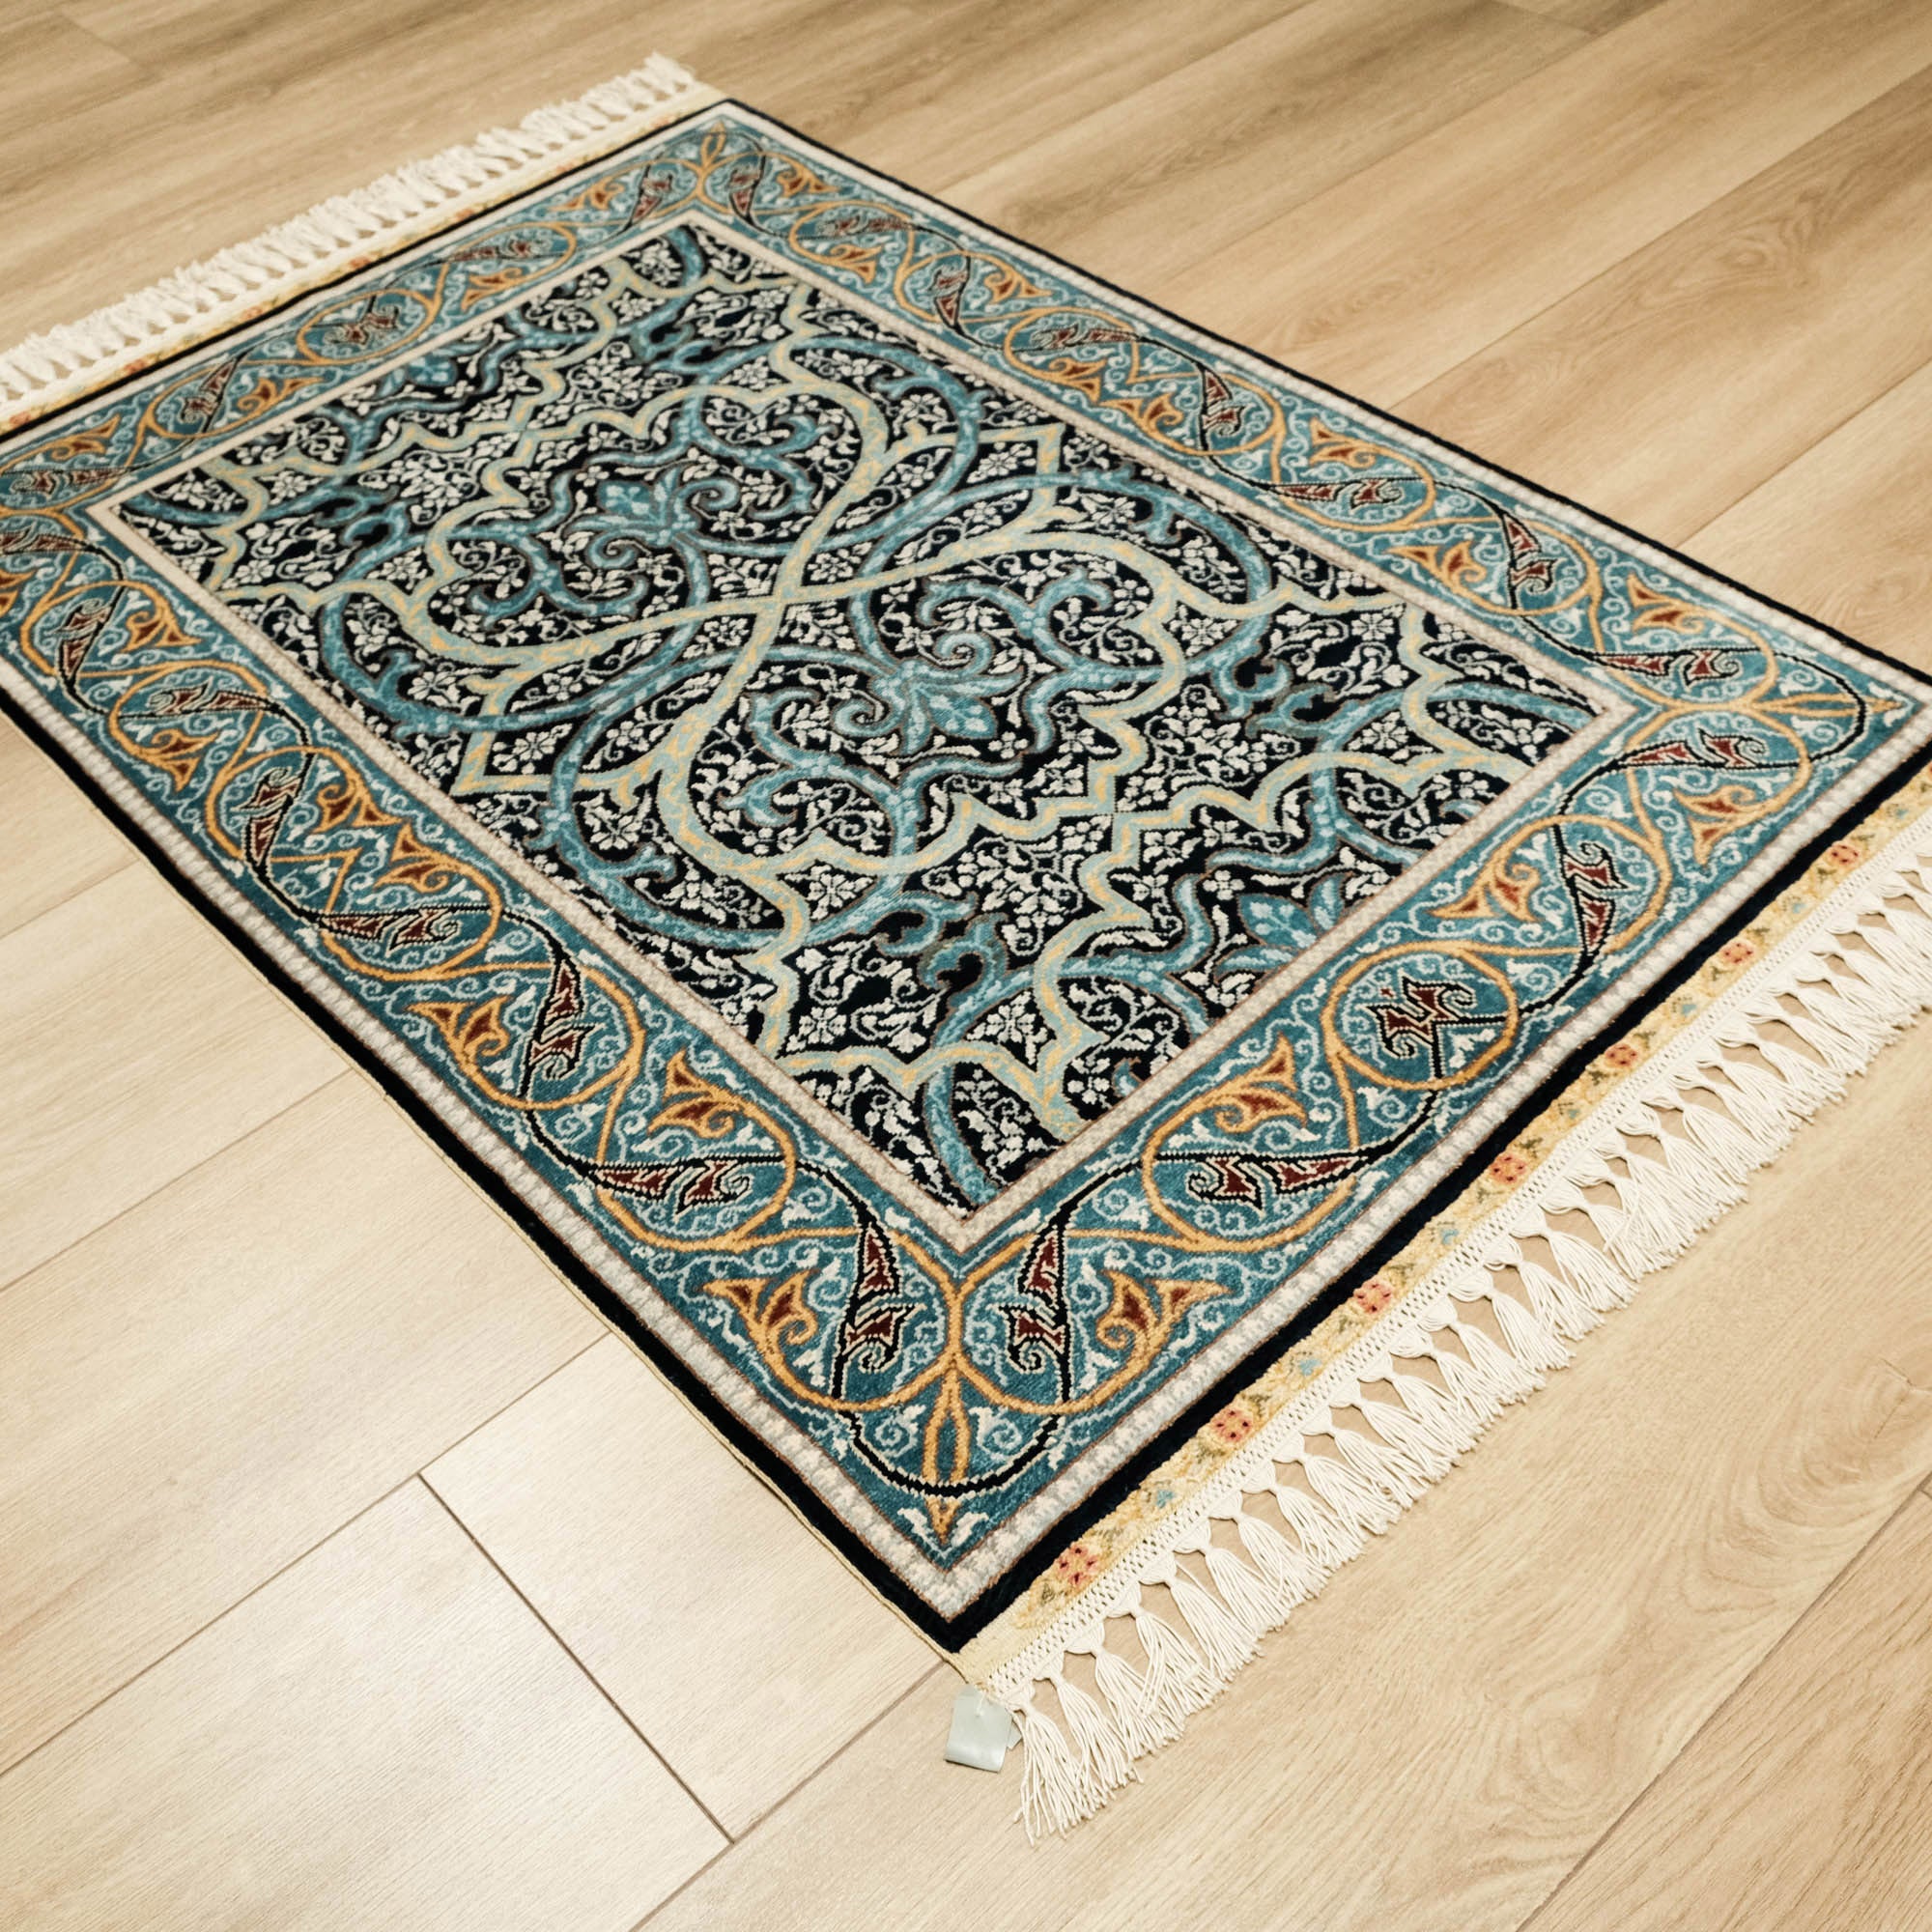 Hand-Woven Turquoise Silk Carpet with Frame Pattern